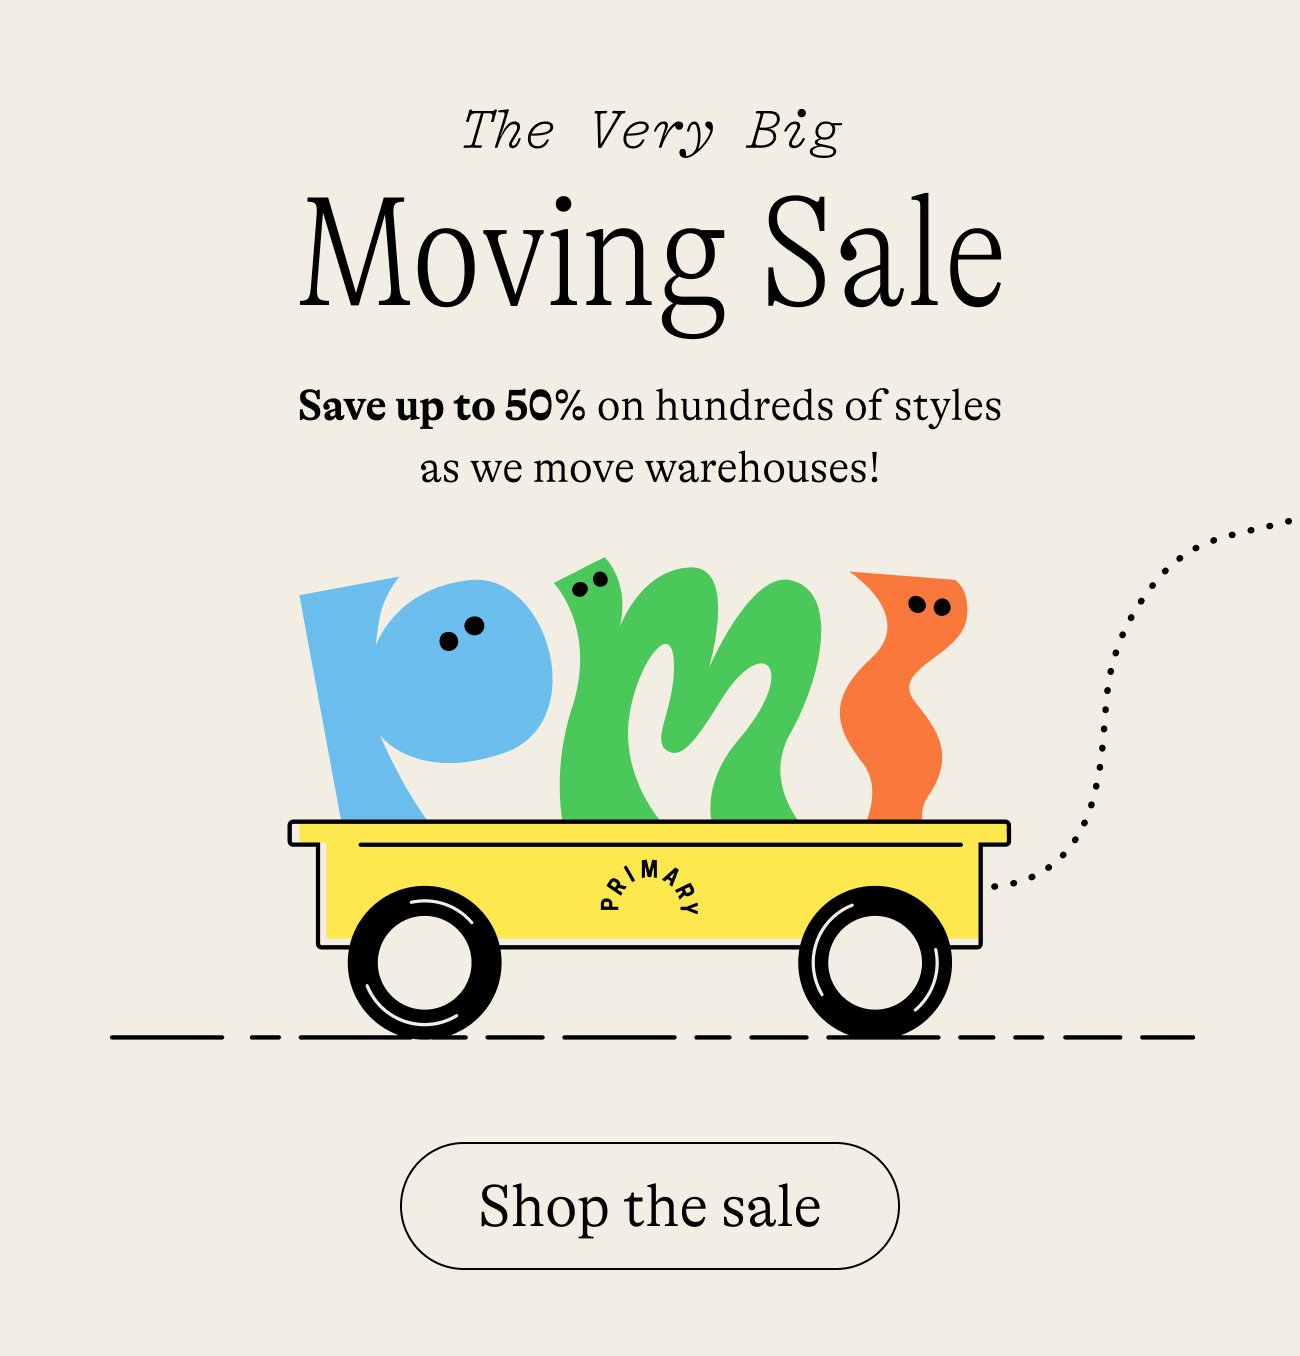 The Very Big Moving Sale. Save up to 50% on hundreds of styles as we move warehouses! Shop the sale.